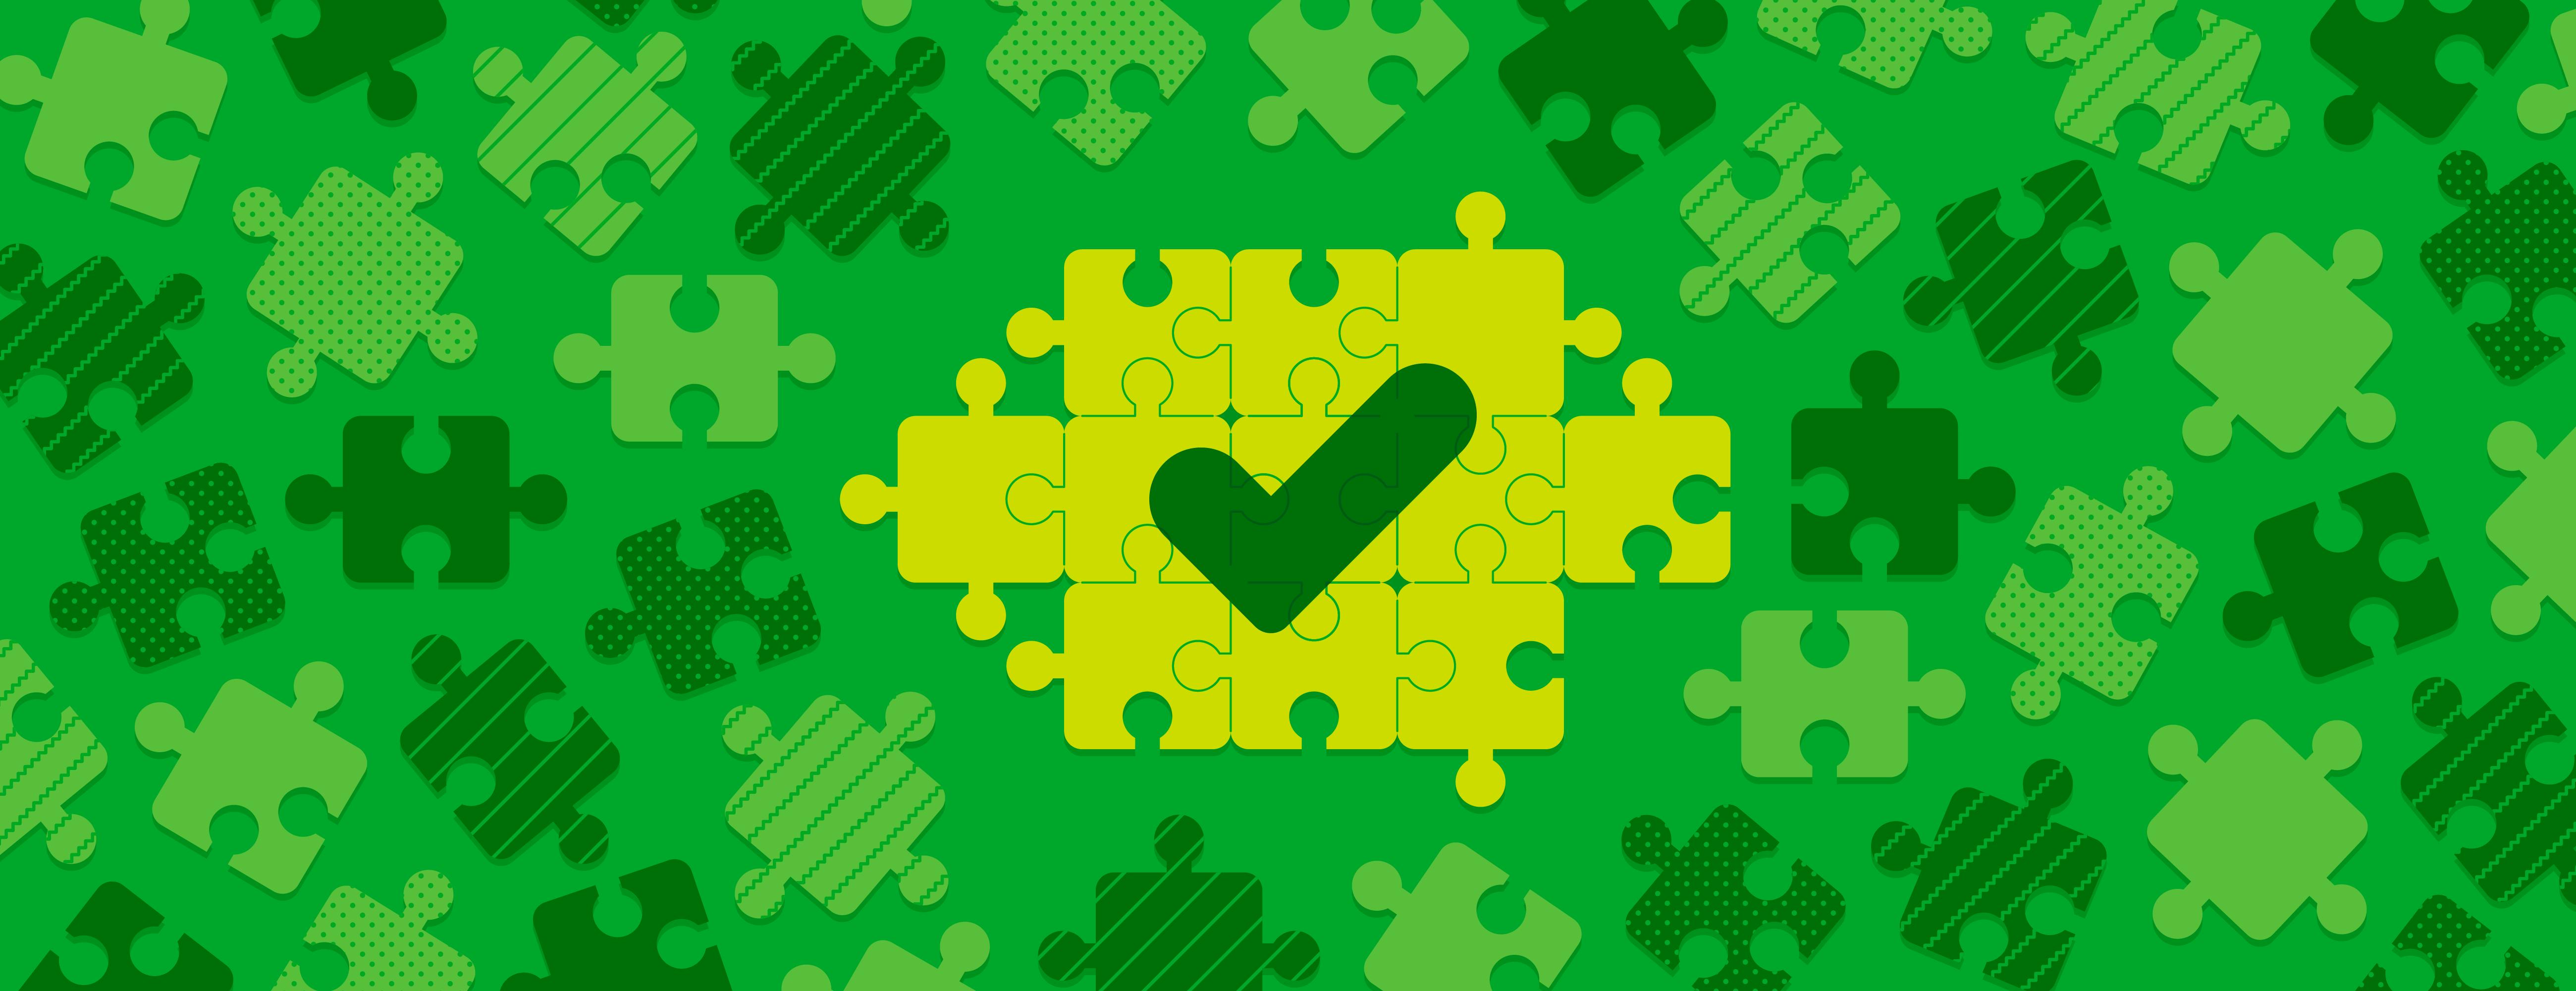 Get Organized with Evernote cover image